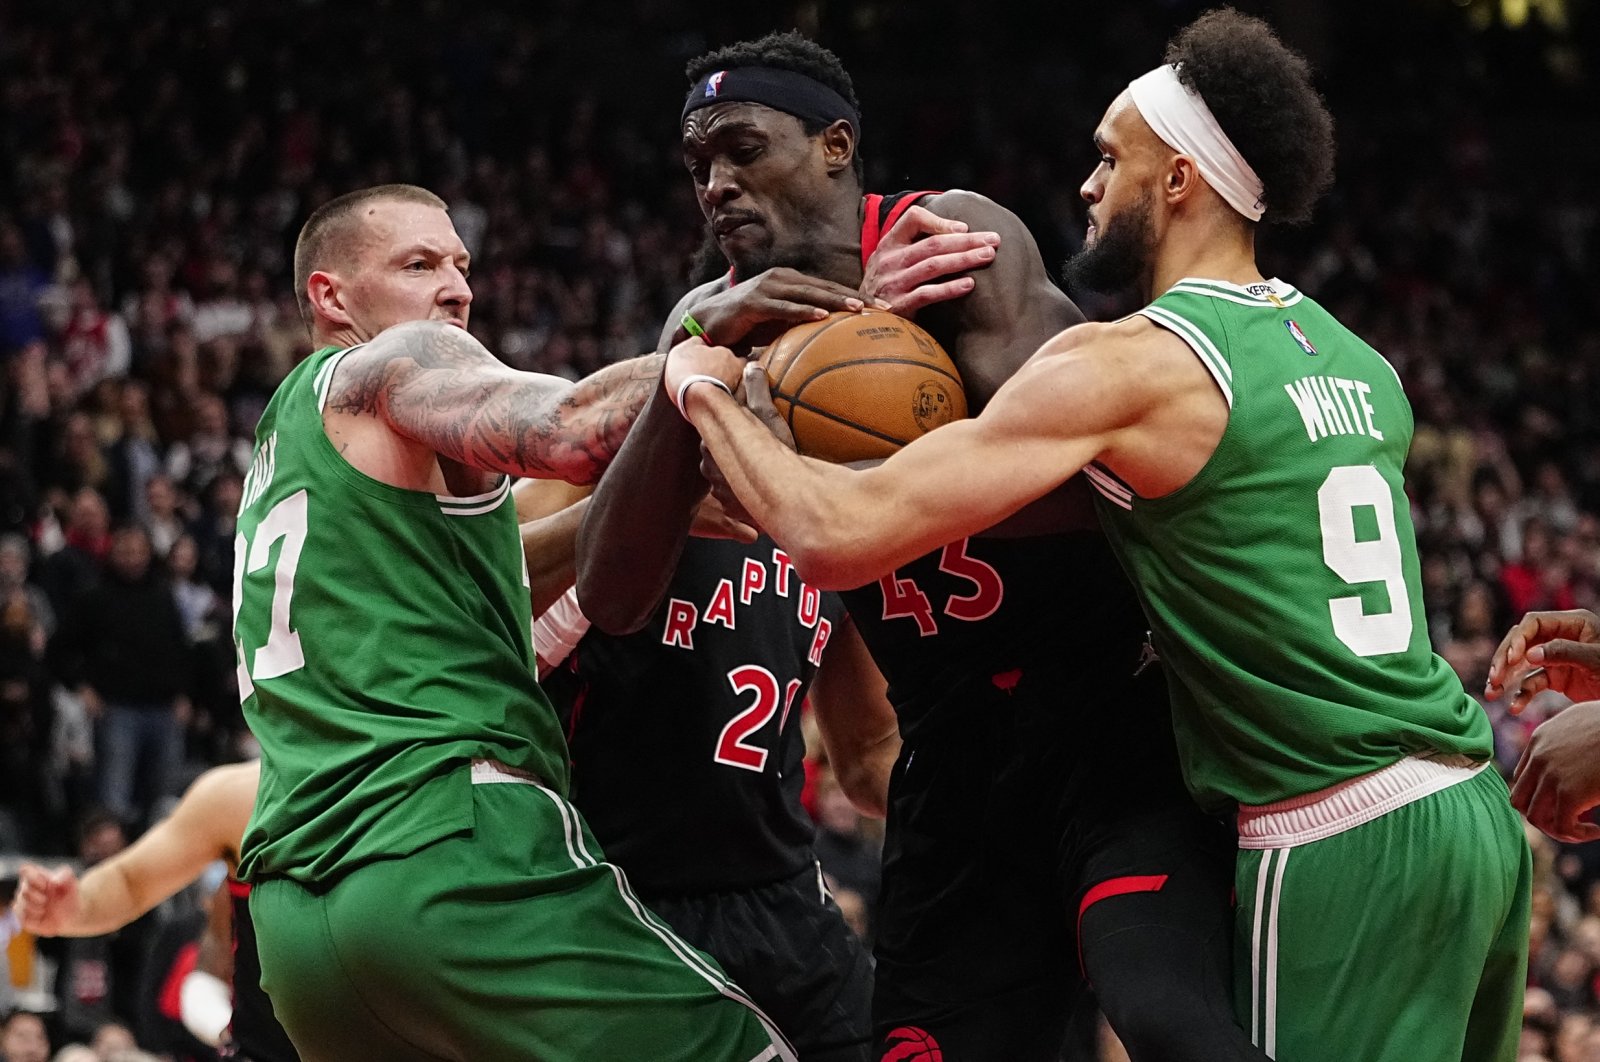 Raptors&#039; Pascal Siakam (C) grabs a rebound from Celtics&#039; Daniel Theis (L) and guard Derrick White during an NBA game, Toronto, Canada, March 28, 2022. (Reuters Photo)